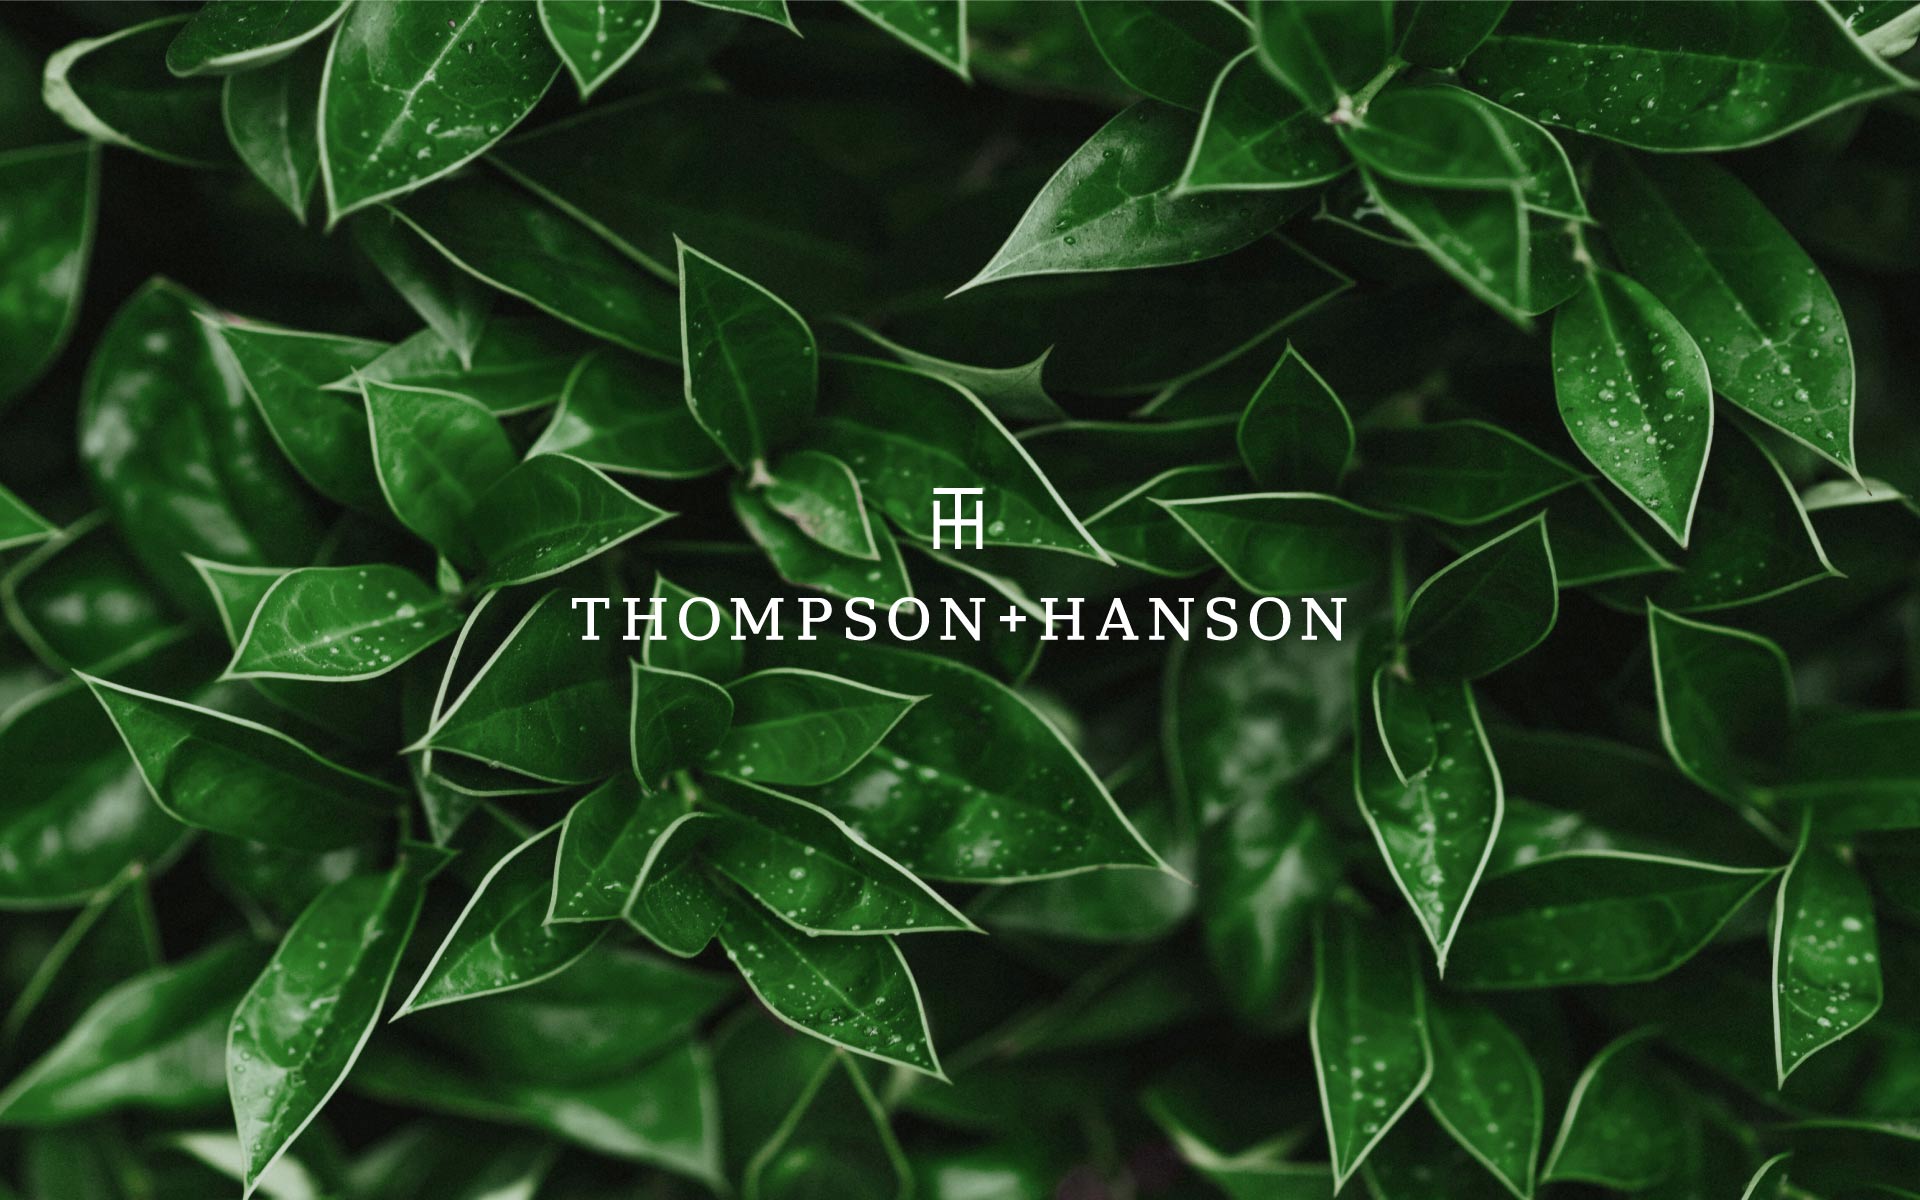 Branding image of Thompson Hanson by Creative Retail Packaging.